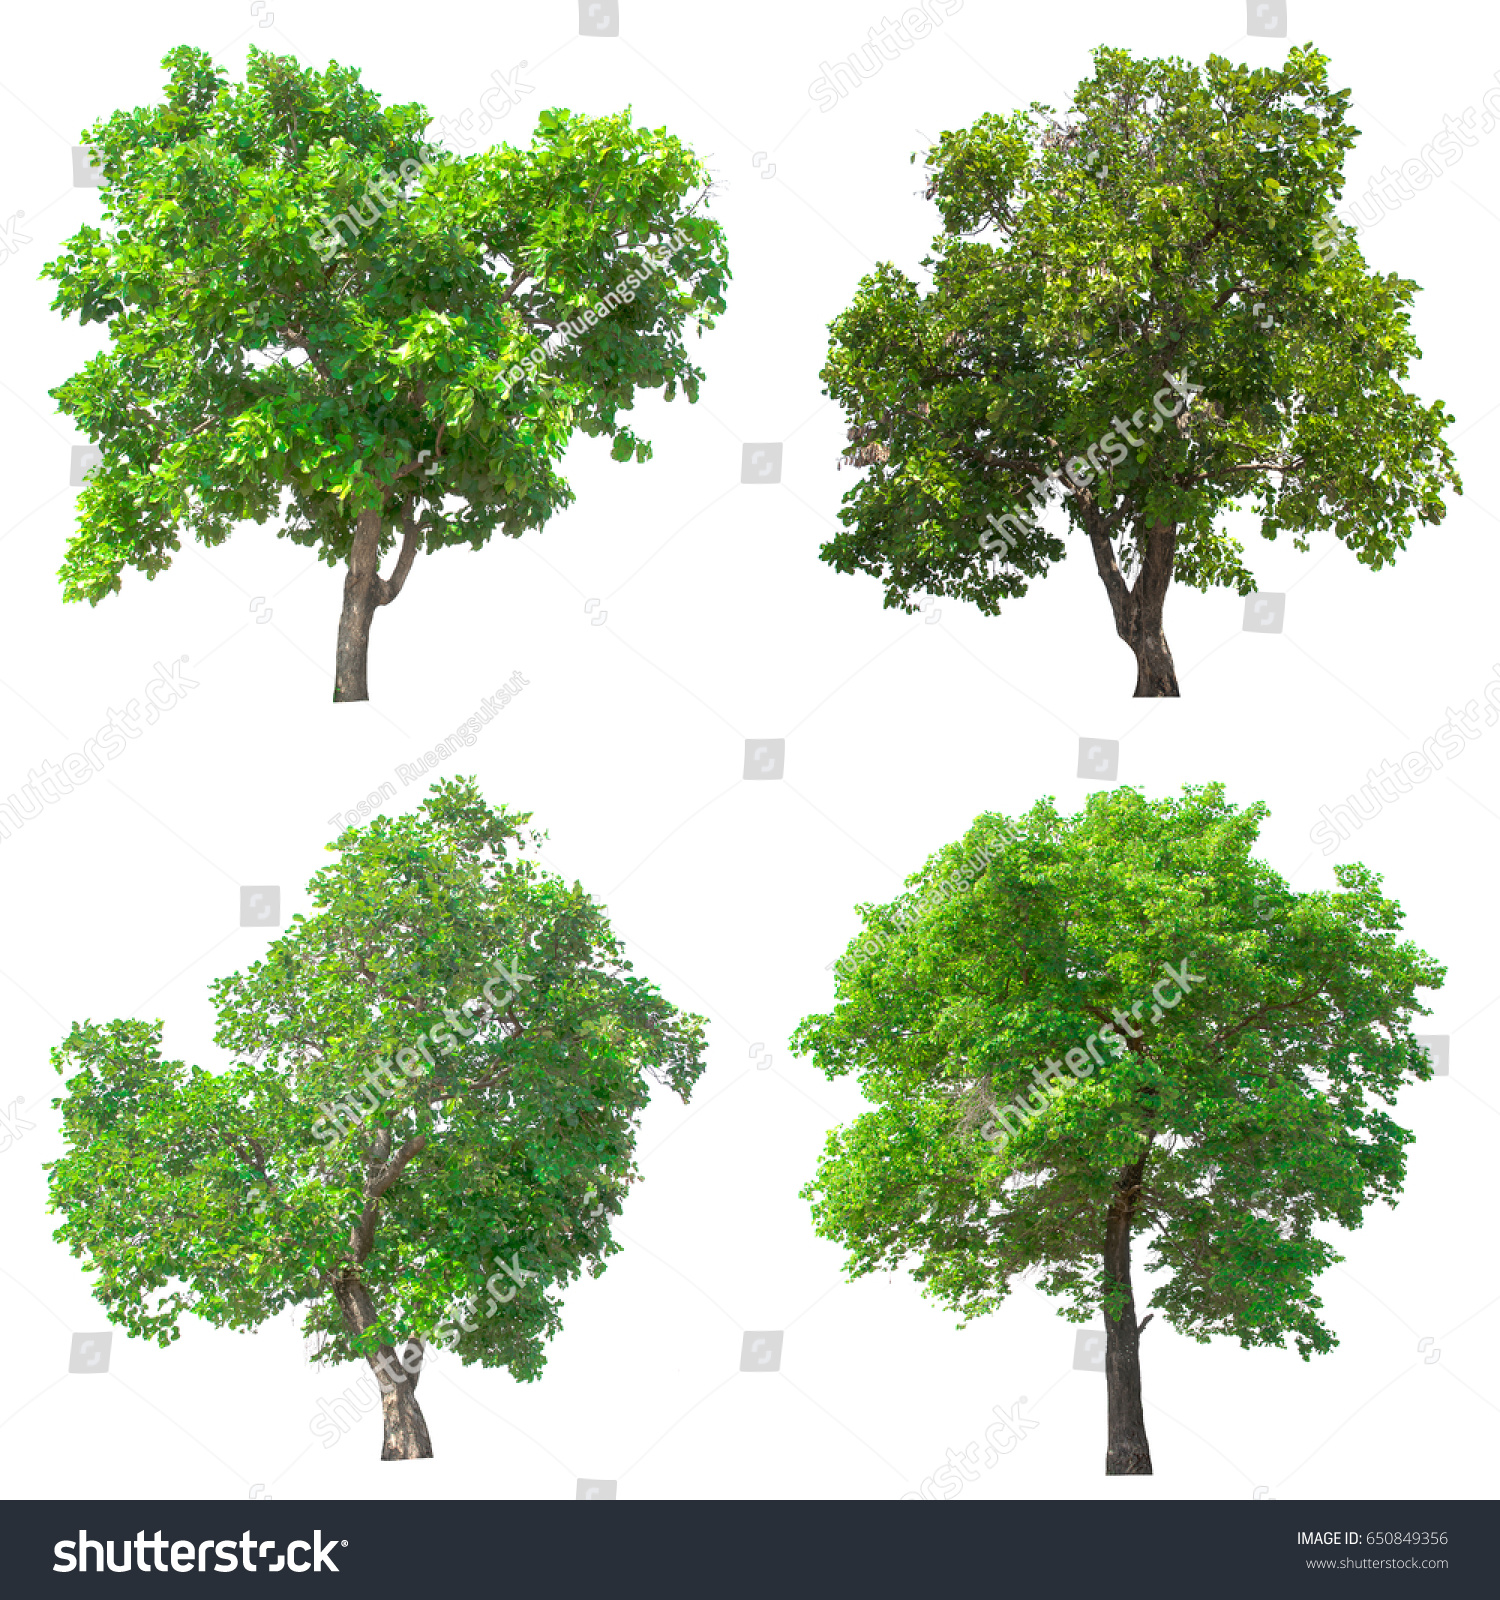 Isolated Tree On White Background Stock Photo 650849356 - Shutterstock